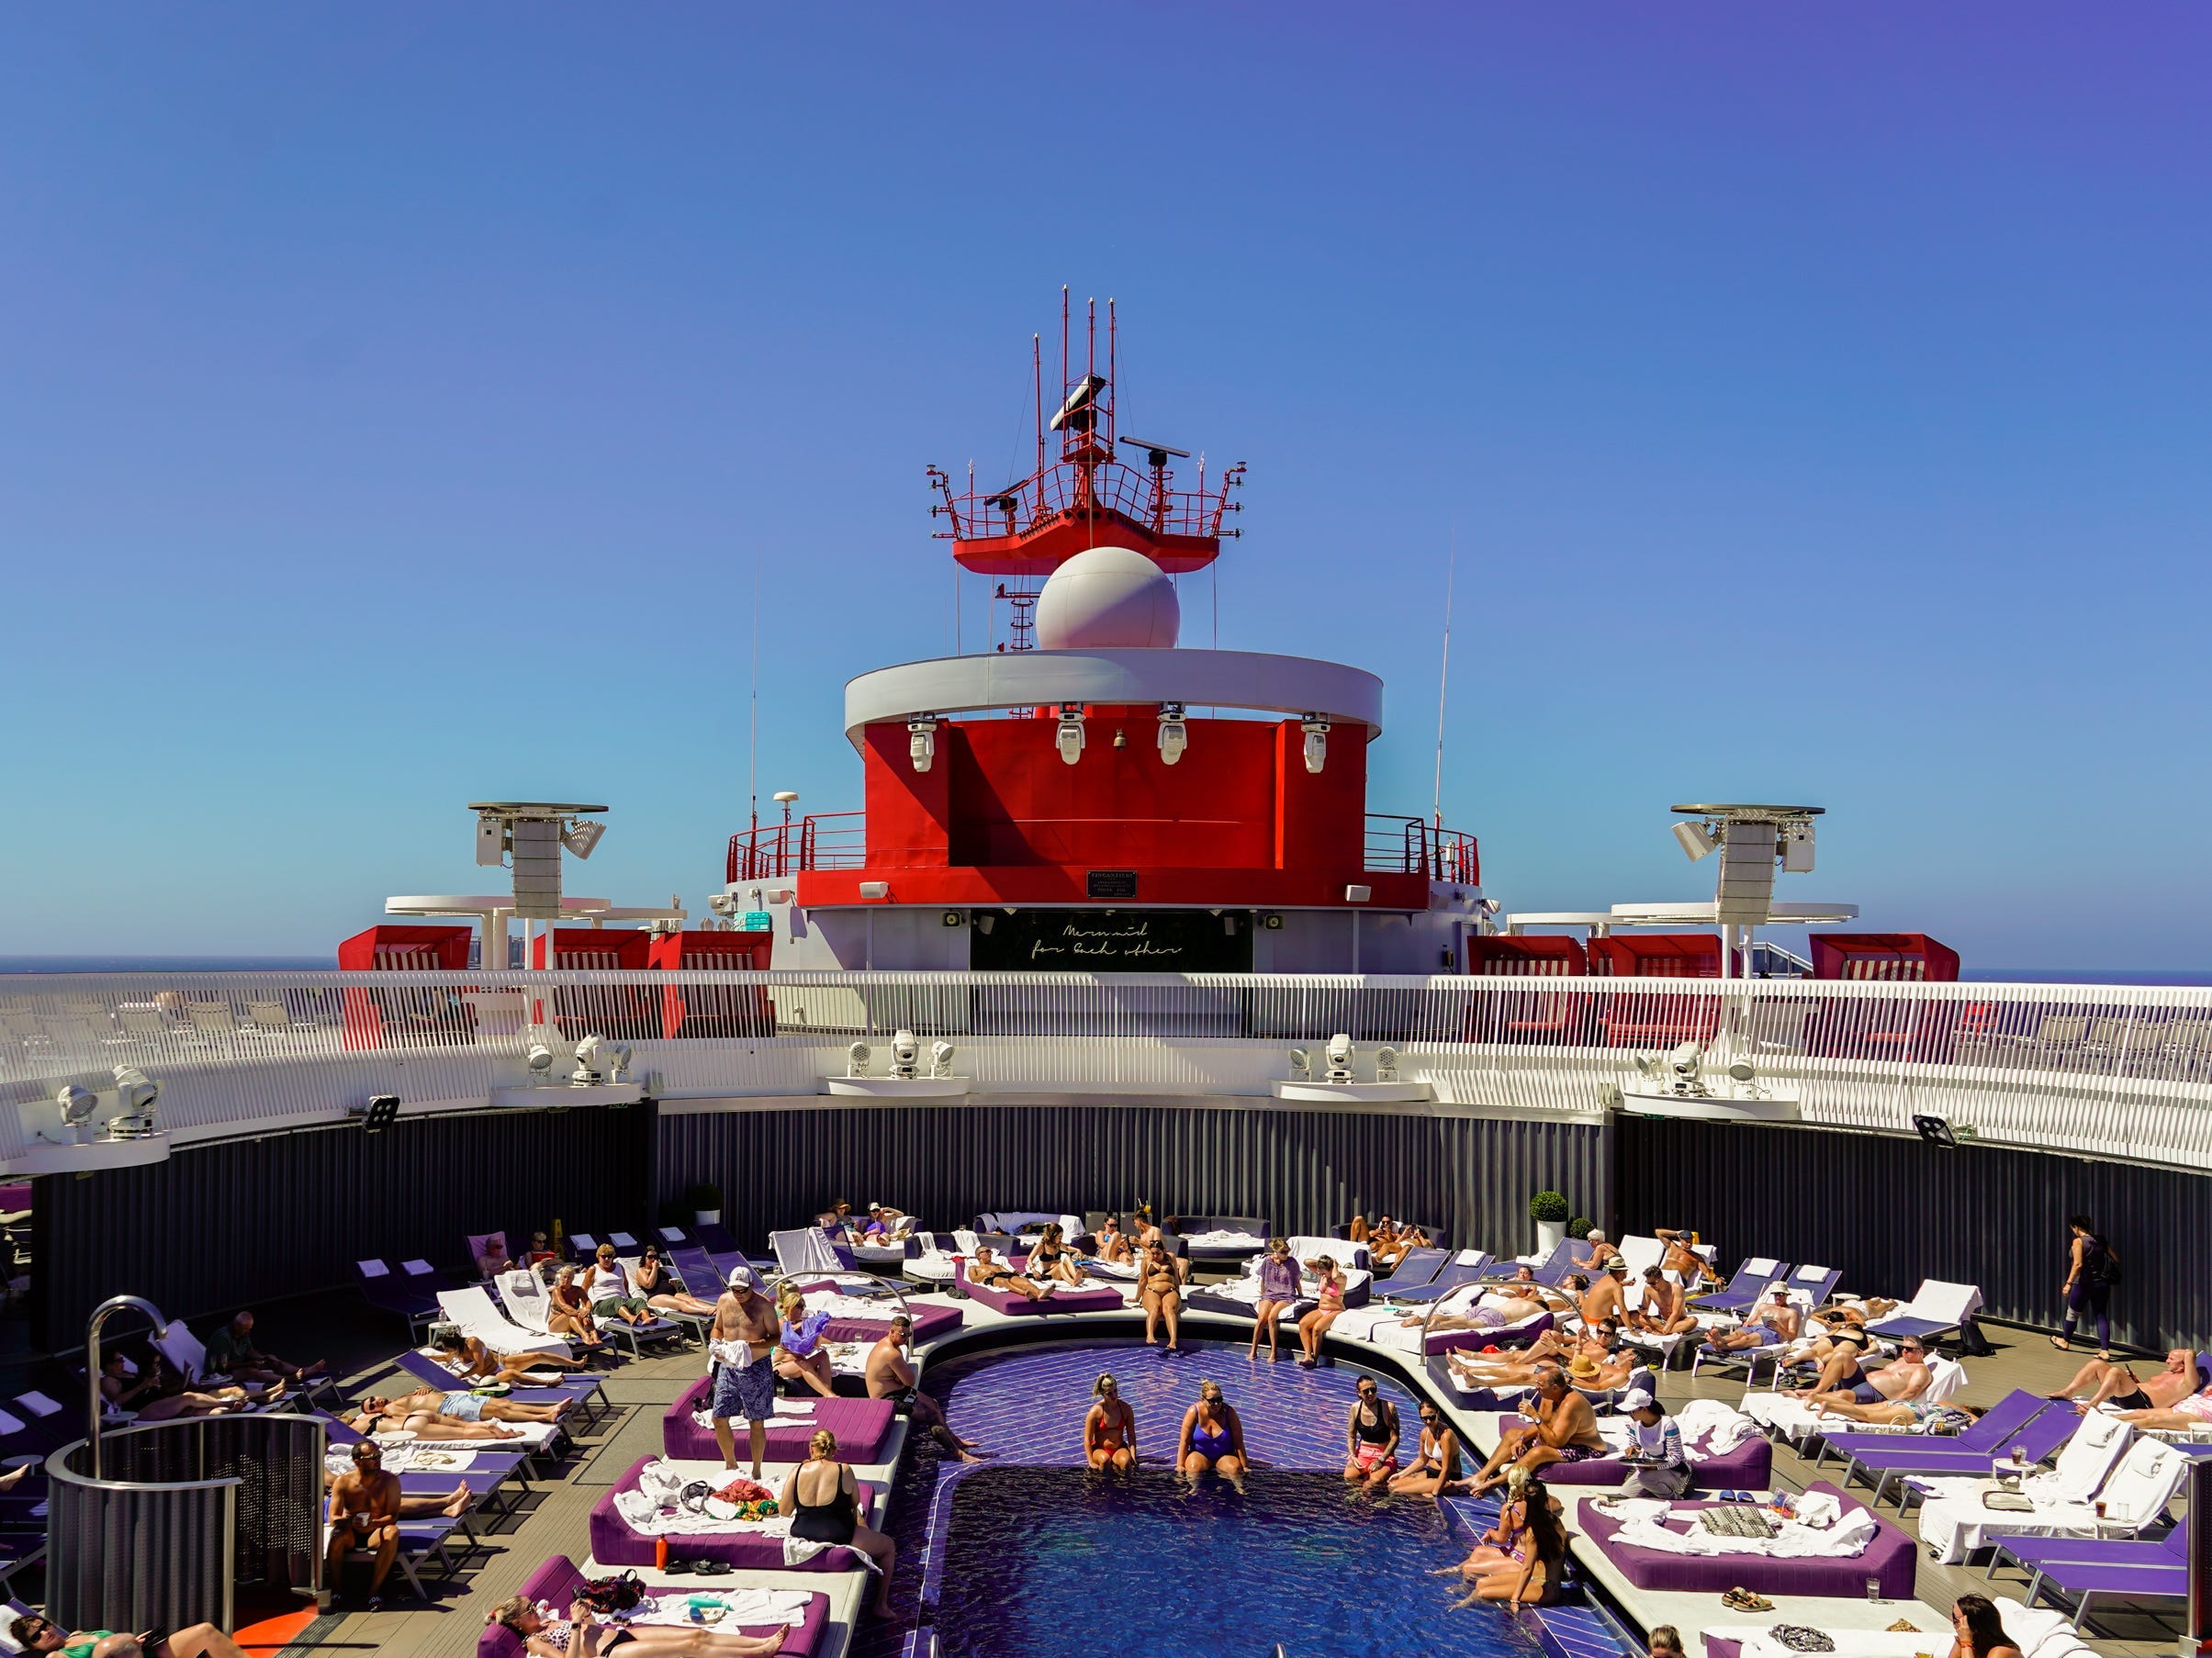 A pool on a cruise ship with people inside it and on pool chairs around it. The sky is clear and blue behind the ship.